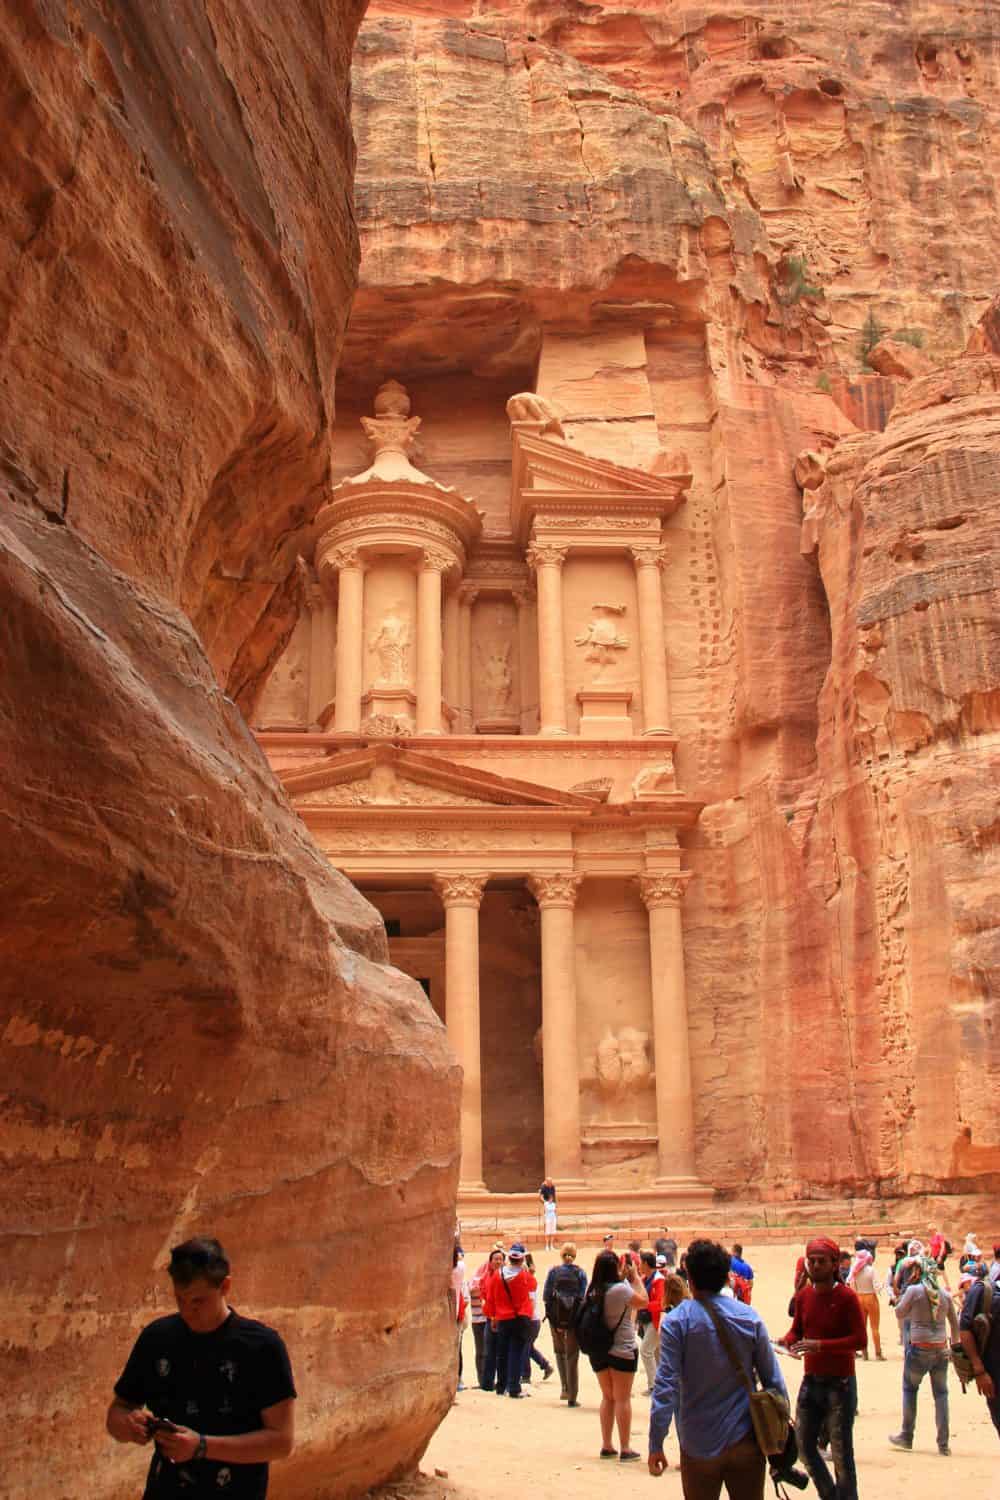 20+ Petra travel tips, the ultimate first-timer's guide to Petra | How to plan a self-guided visit to Petra, Petra trip planning tips, how to visit Petra, what to do in Jordan, Petra travel guide, travel tips for Petra, where to stay in Wadi Musa #petra #jordan #bucketlist